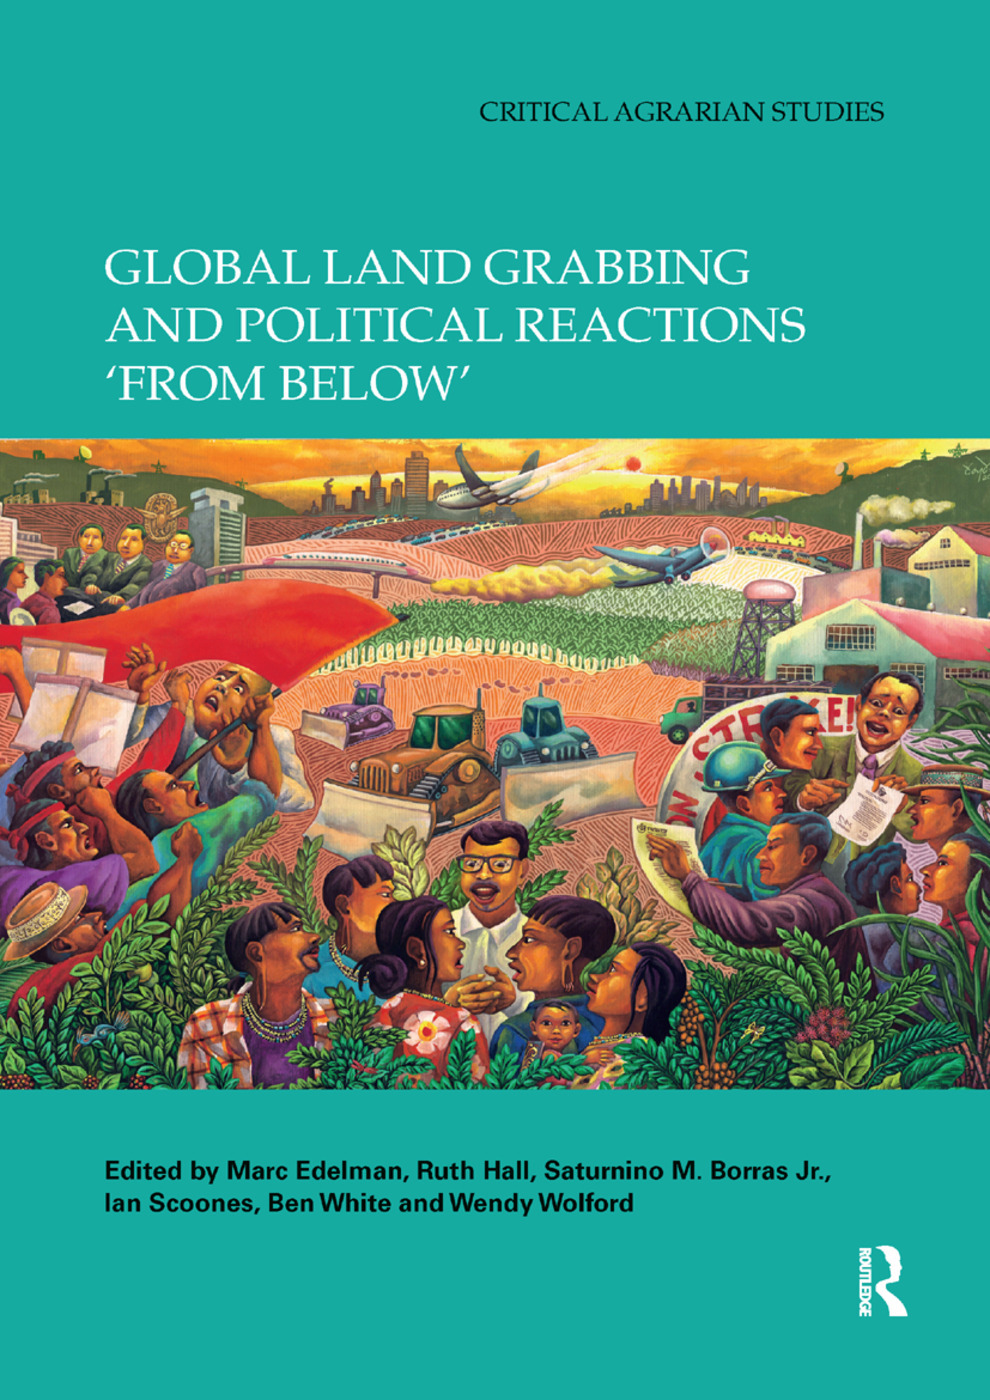 Global Land Grabbing and Political Reactions ‘from Below’ (Edited by Marc Edelman, Ruth Hall, Saturnino M. Borras Jr., Ian Scoones and Wendy Wolford) Promo Image